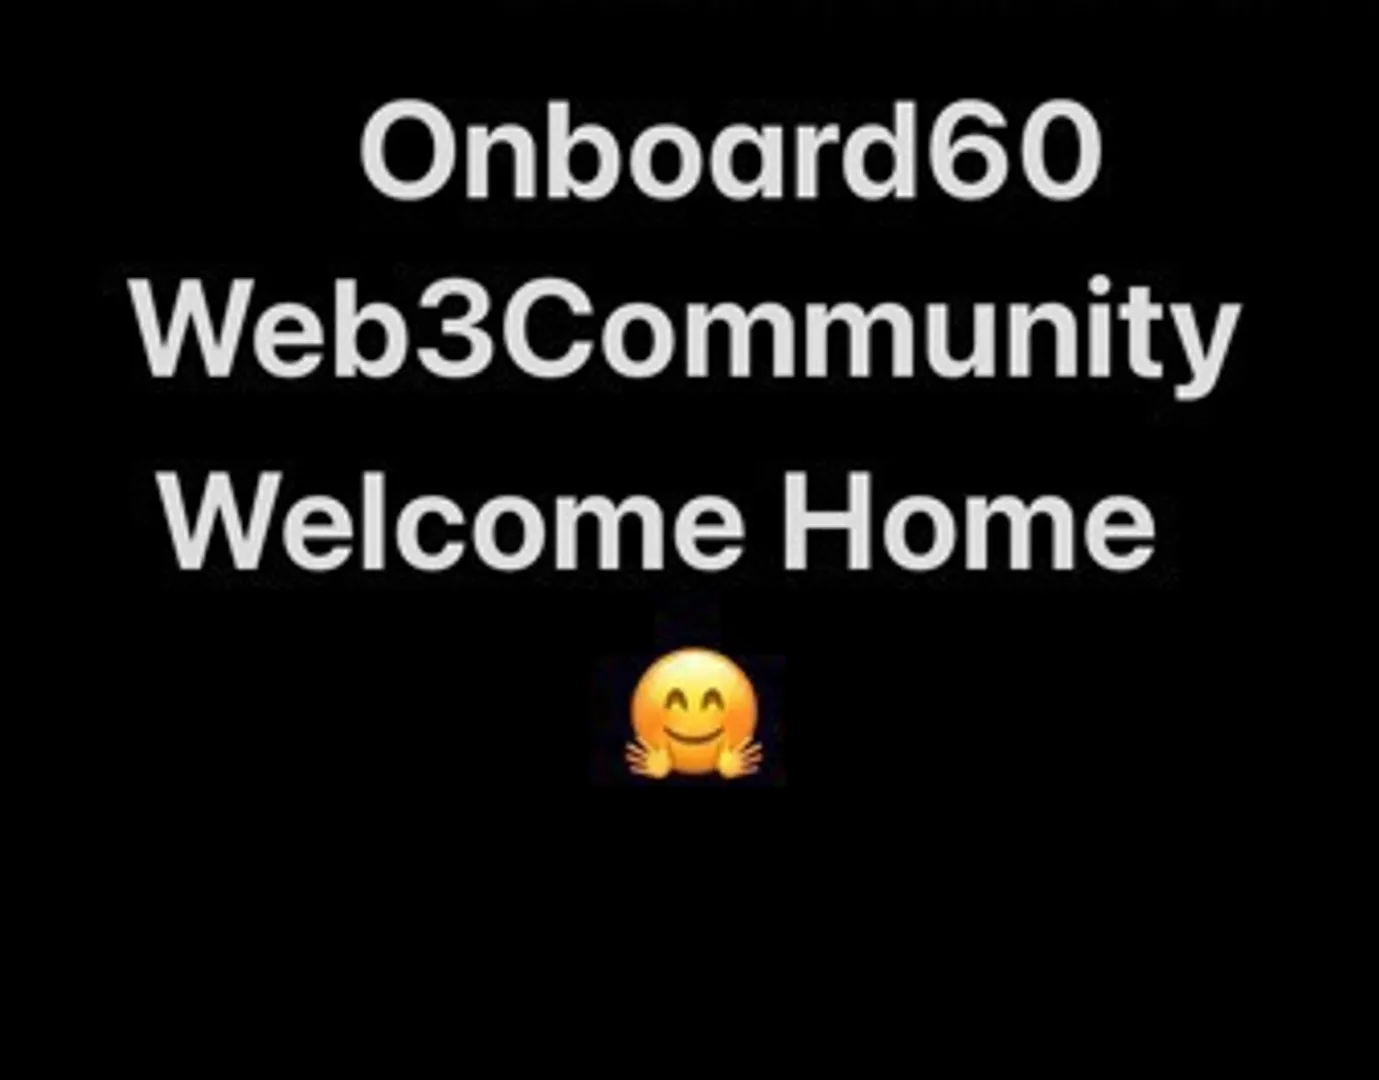 If you are a member of the Onboard60 Community and need or want content for your business, Let me record a LIVE interview here on Entre. You can then repurpose it for your media.

Join today and get free content for you and your business.

https://joinentre.com/community/join/5fa72b3d-d882-c000-0026-29dbe6466438